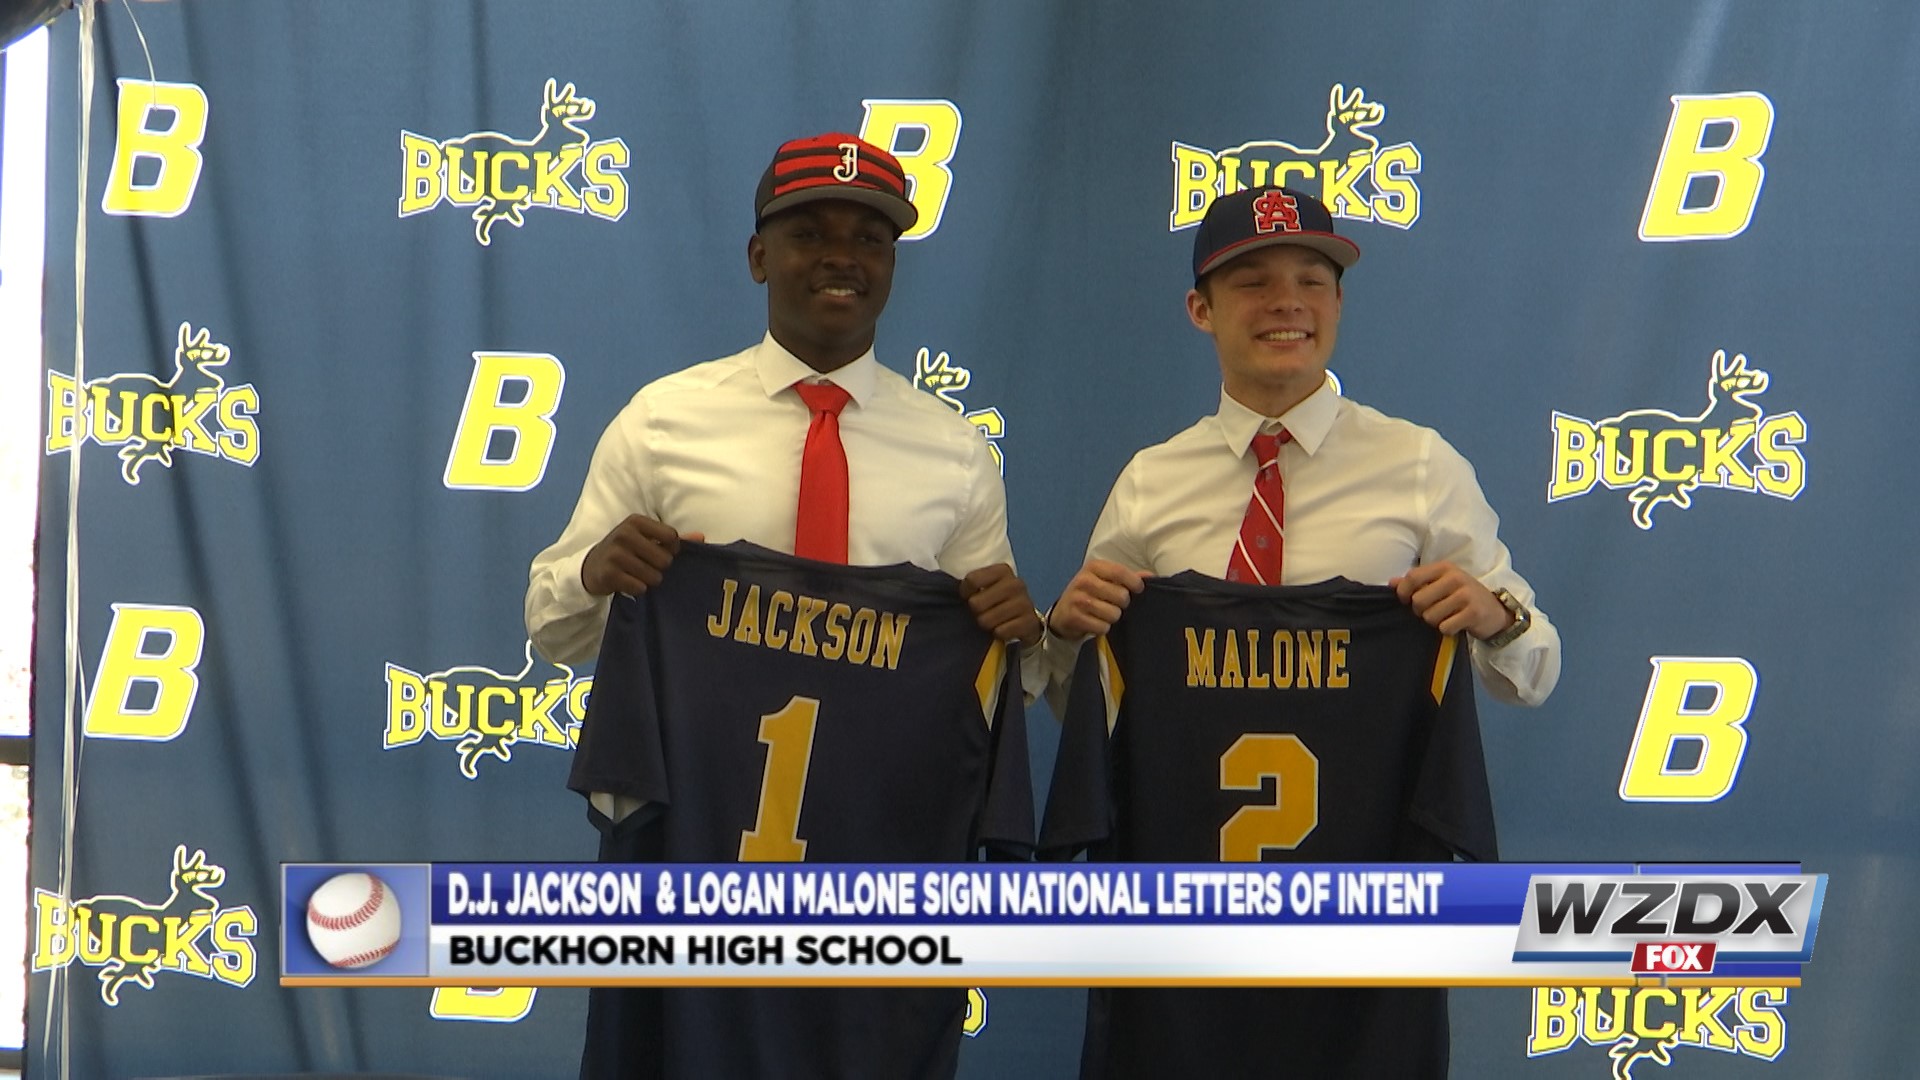 Buckhorn baseball standouts D.J. Jackson and Logan Malone signed national letters of intent Friday on campus. 
Jackson signed with the Jacksonville State Gamecocks, while Malone signed with the South Alabama Jaguars.